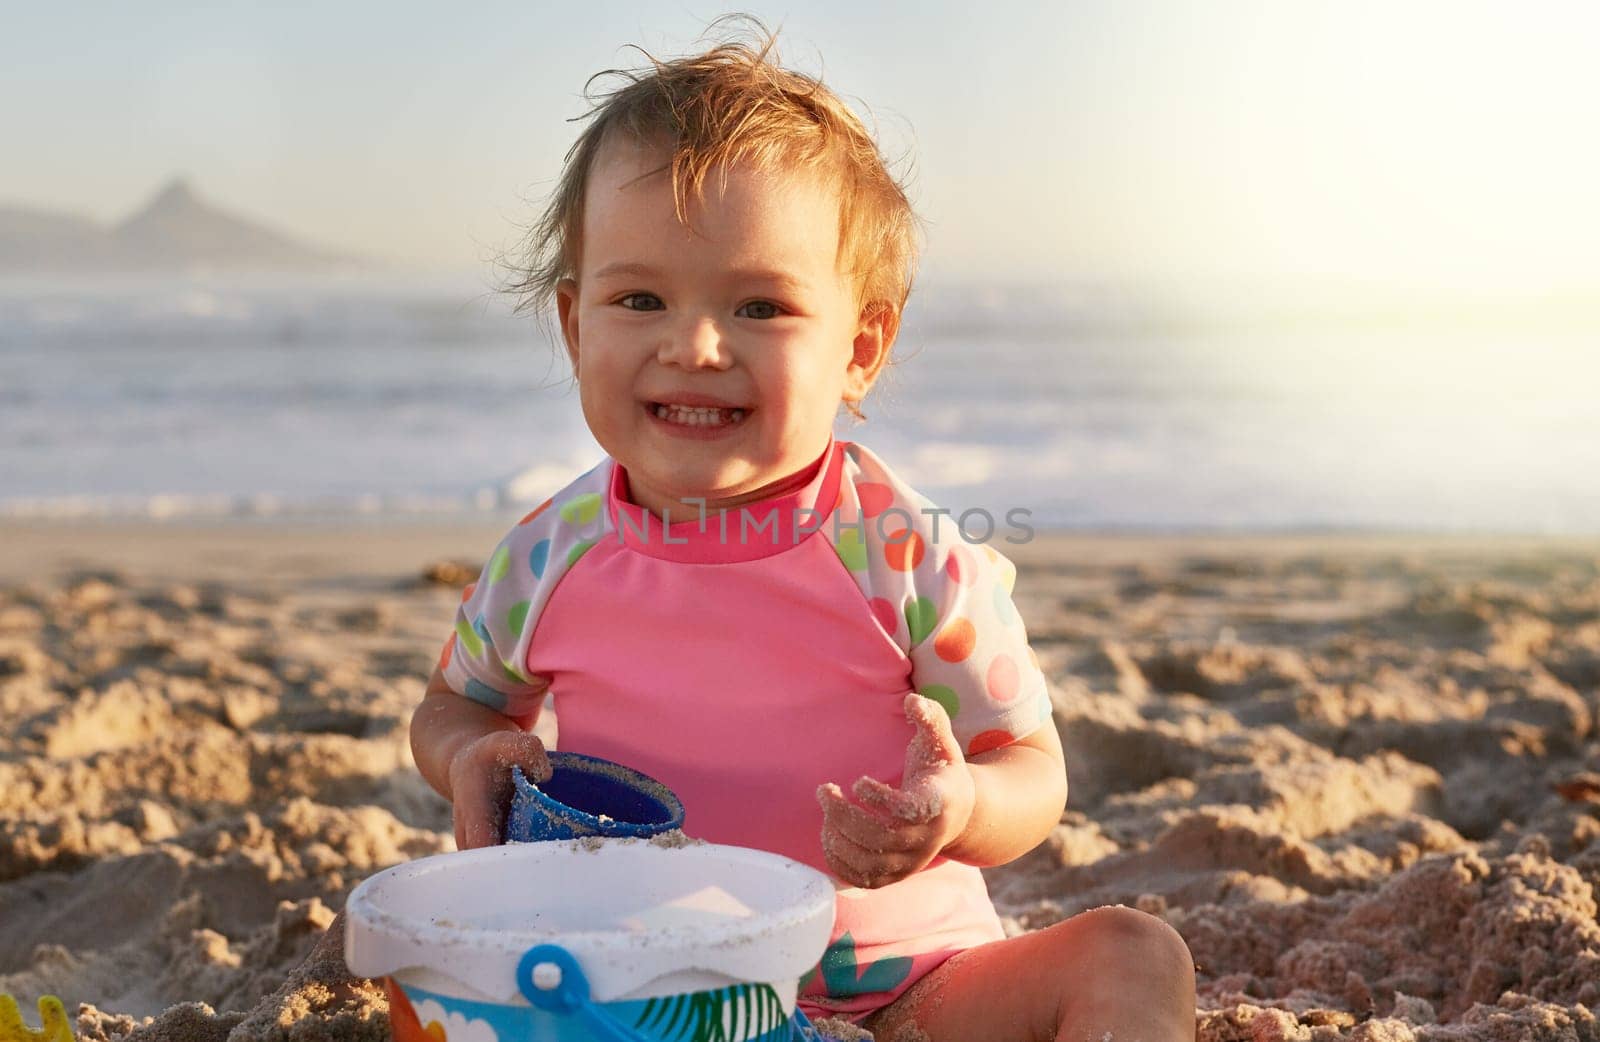 Girl, baby and playing in sand on beach with portrait, toy bucket and happy with swimwear in summer. Child, toddler and smile with relax on holiday, vacation and fun with sunlight by ocean in nature.